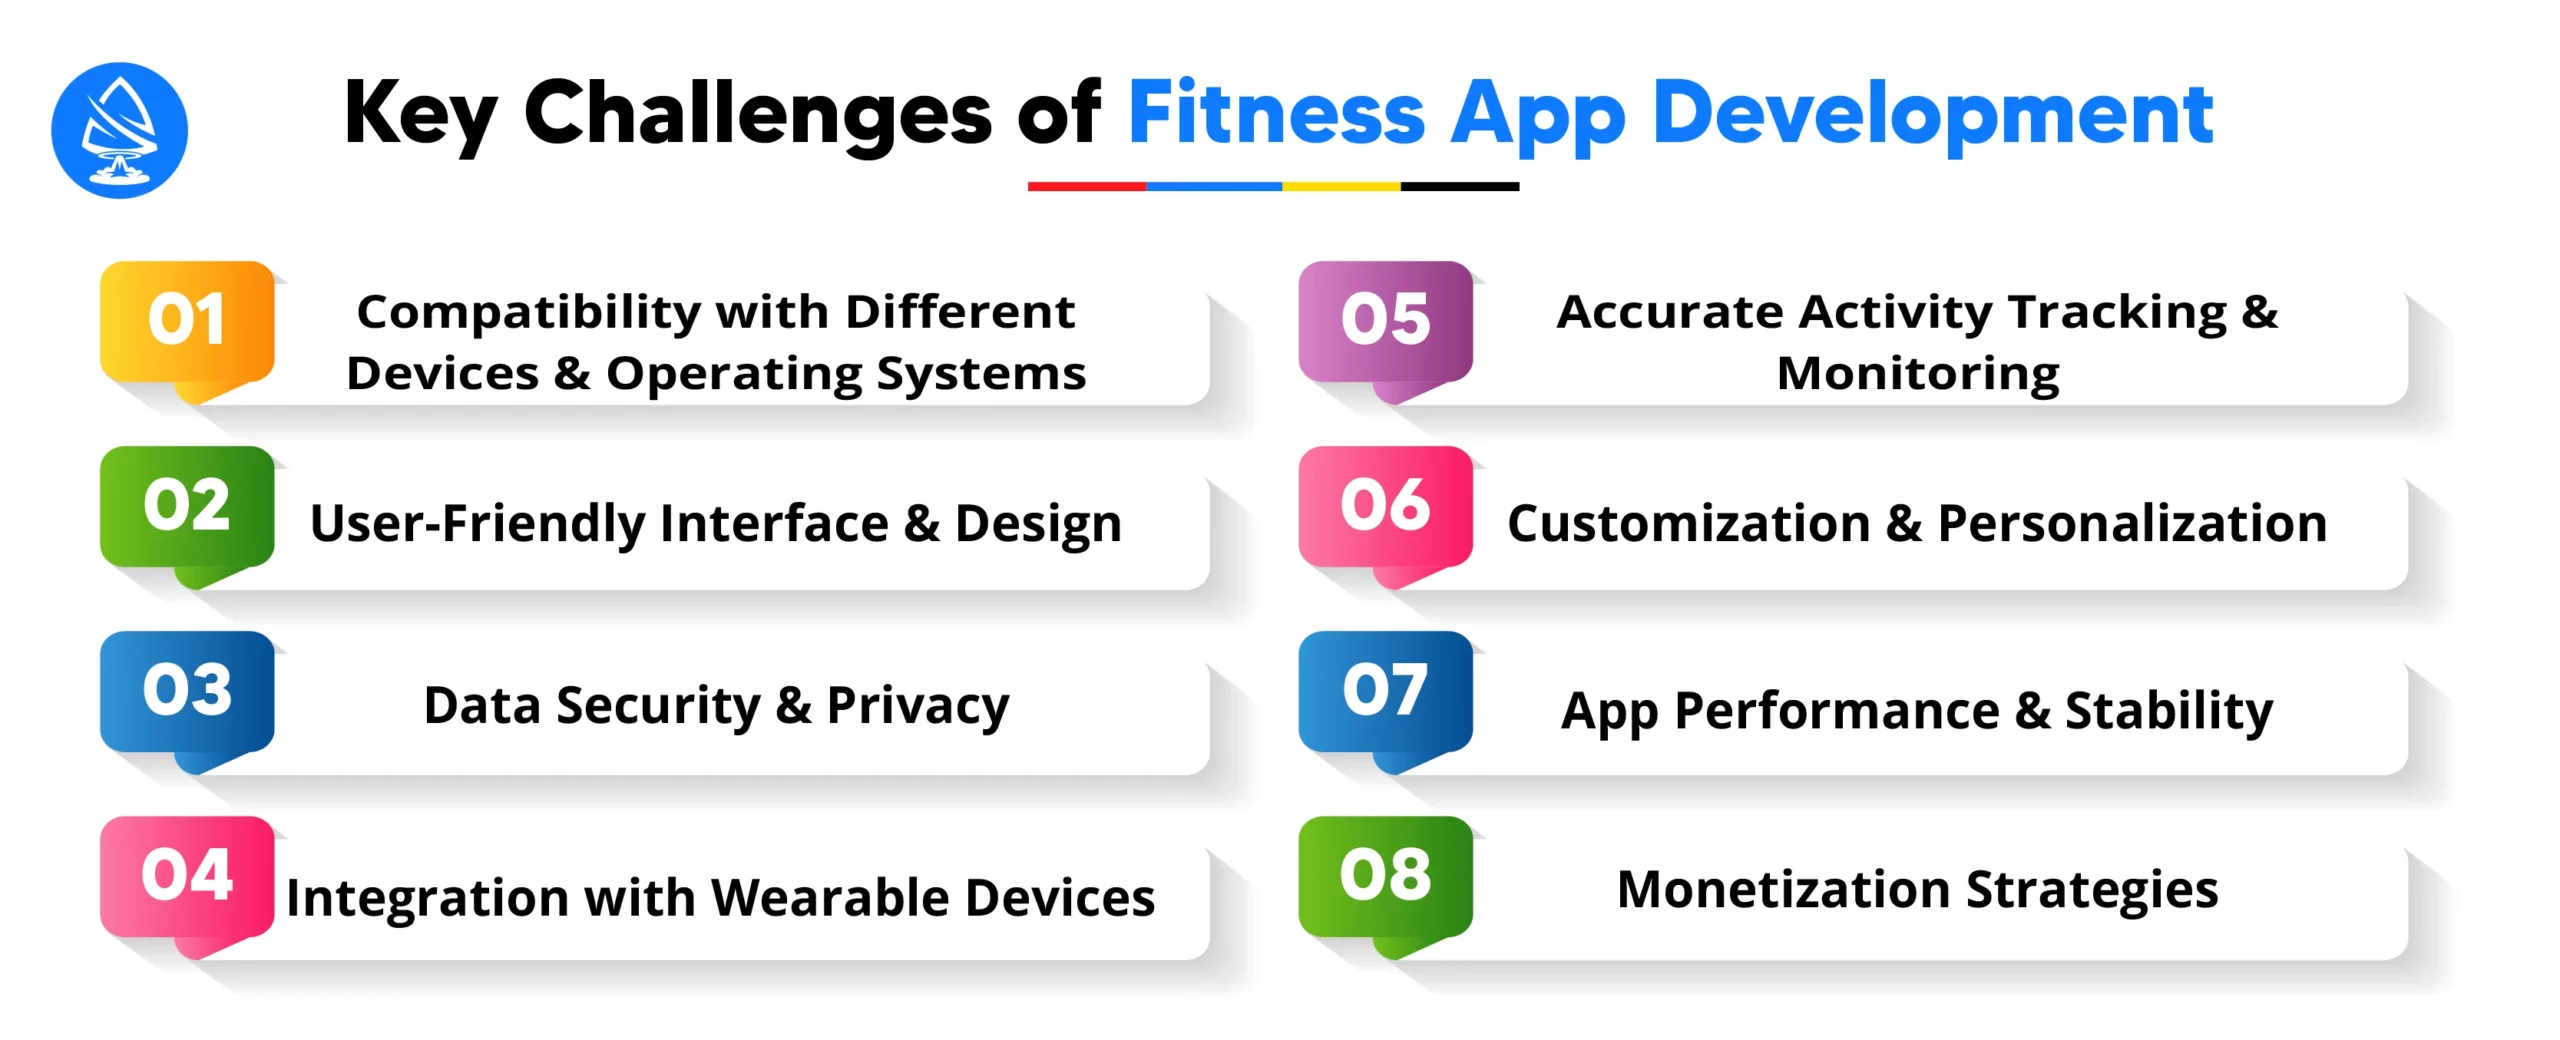 Key Challenges of Fitness Application Development